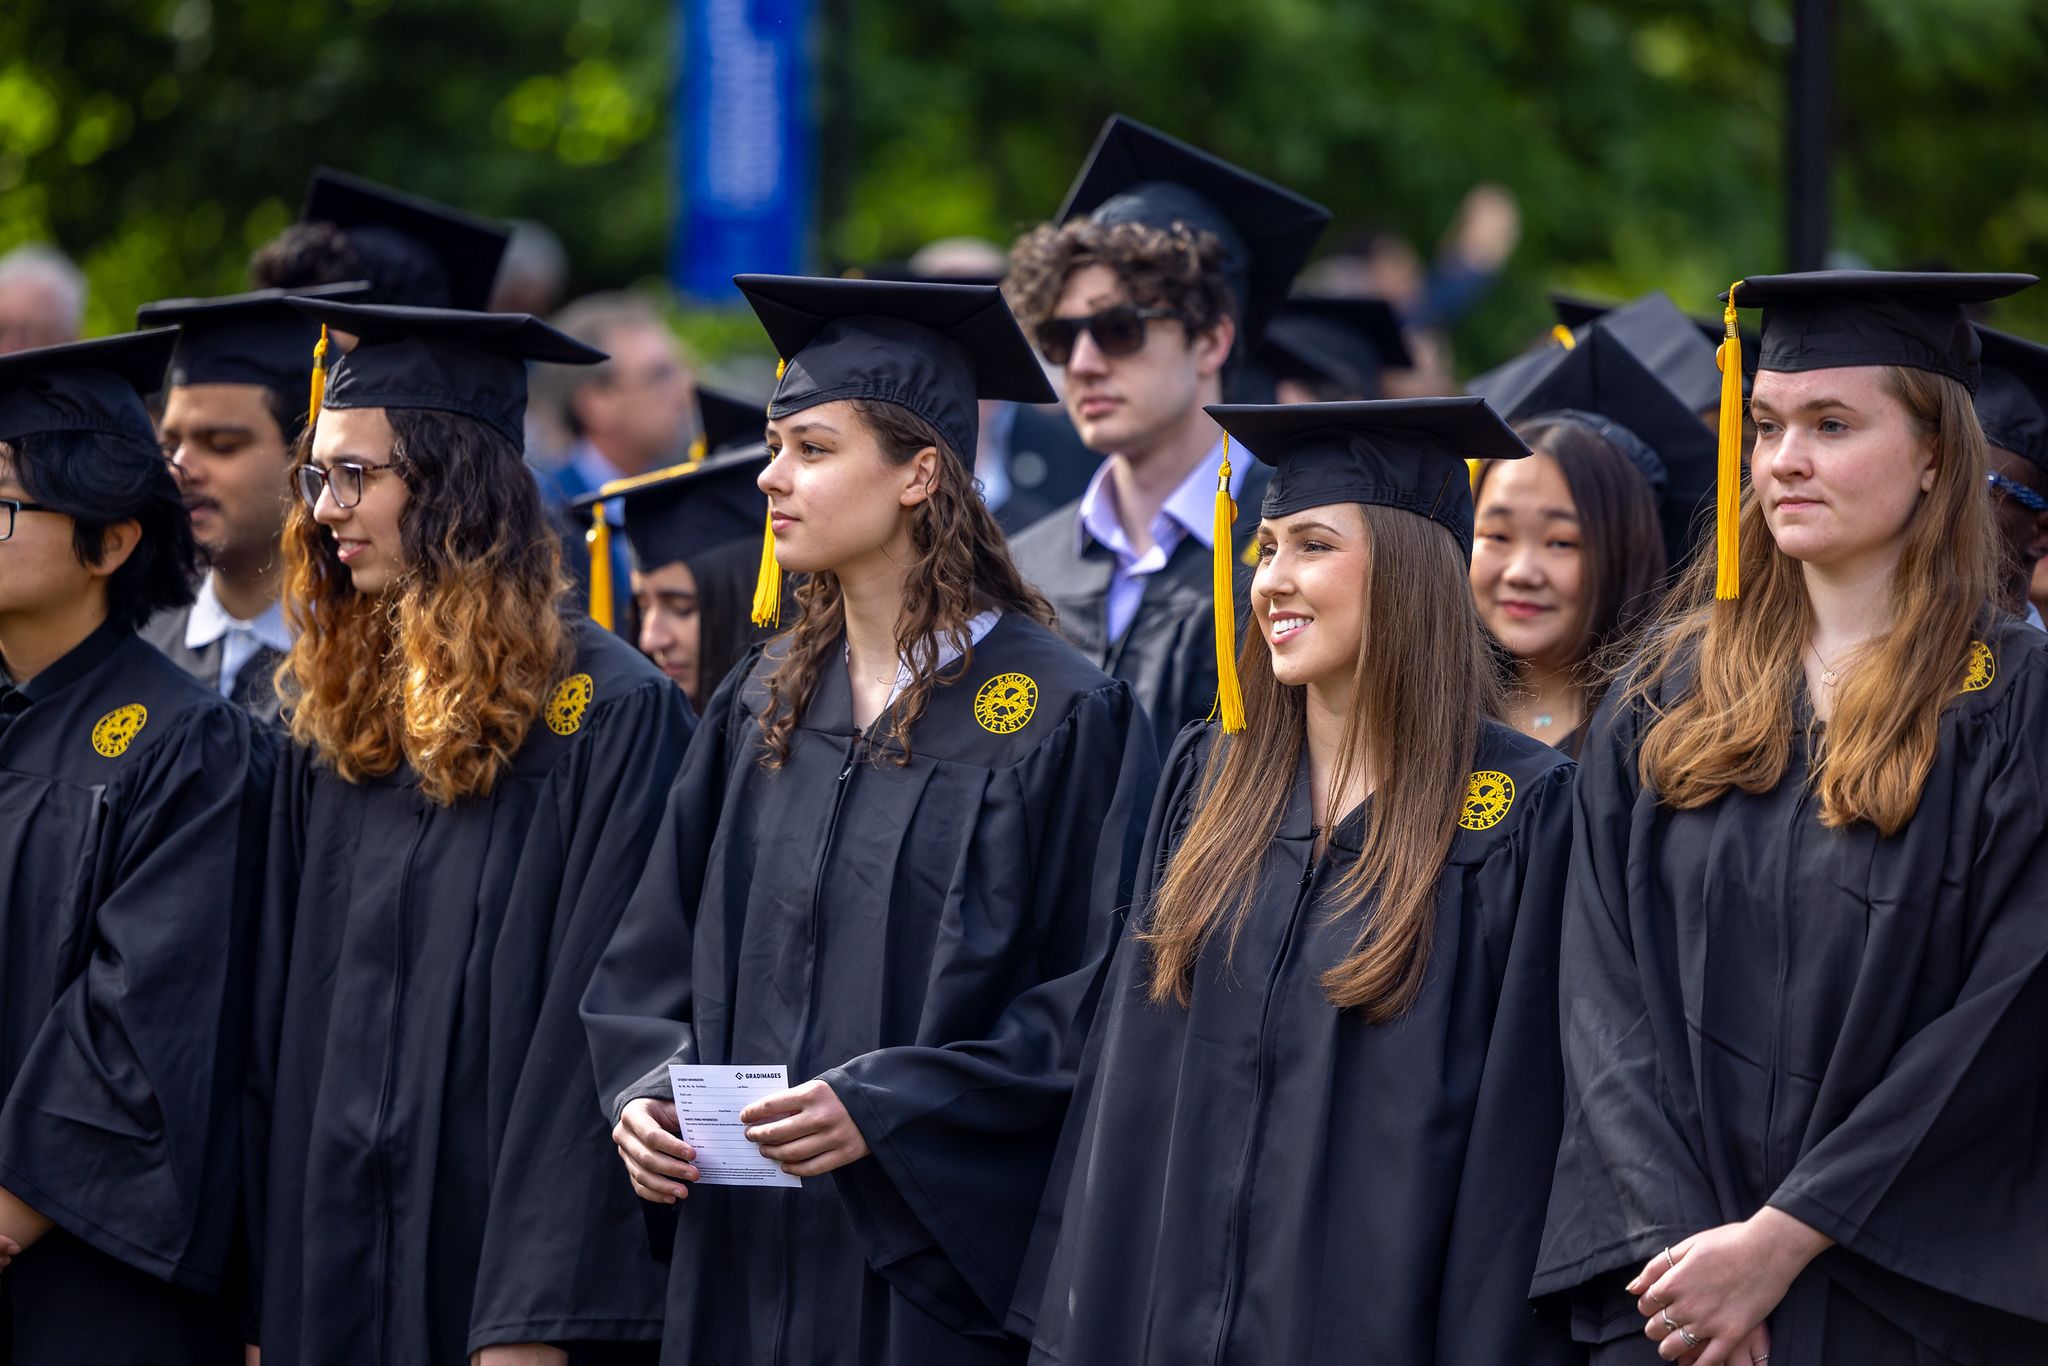 Students at Commencement at Oxford College of Emory University